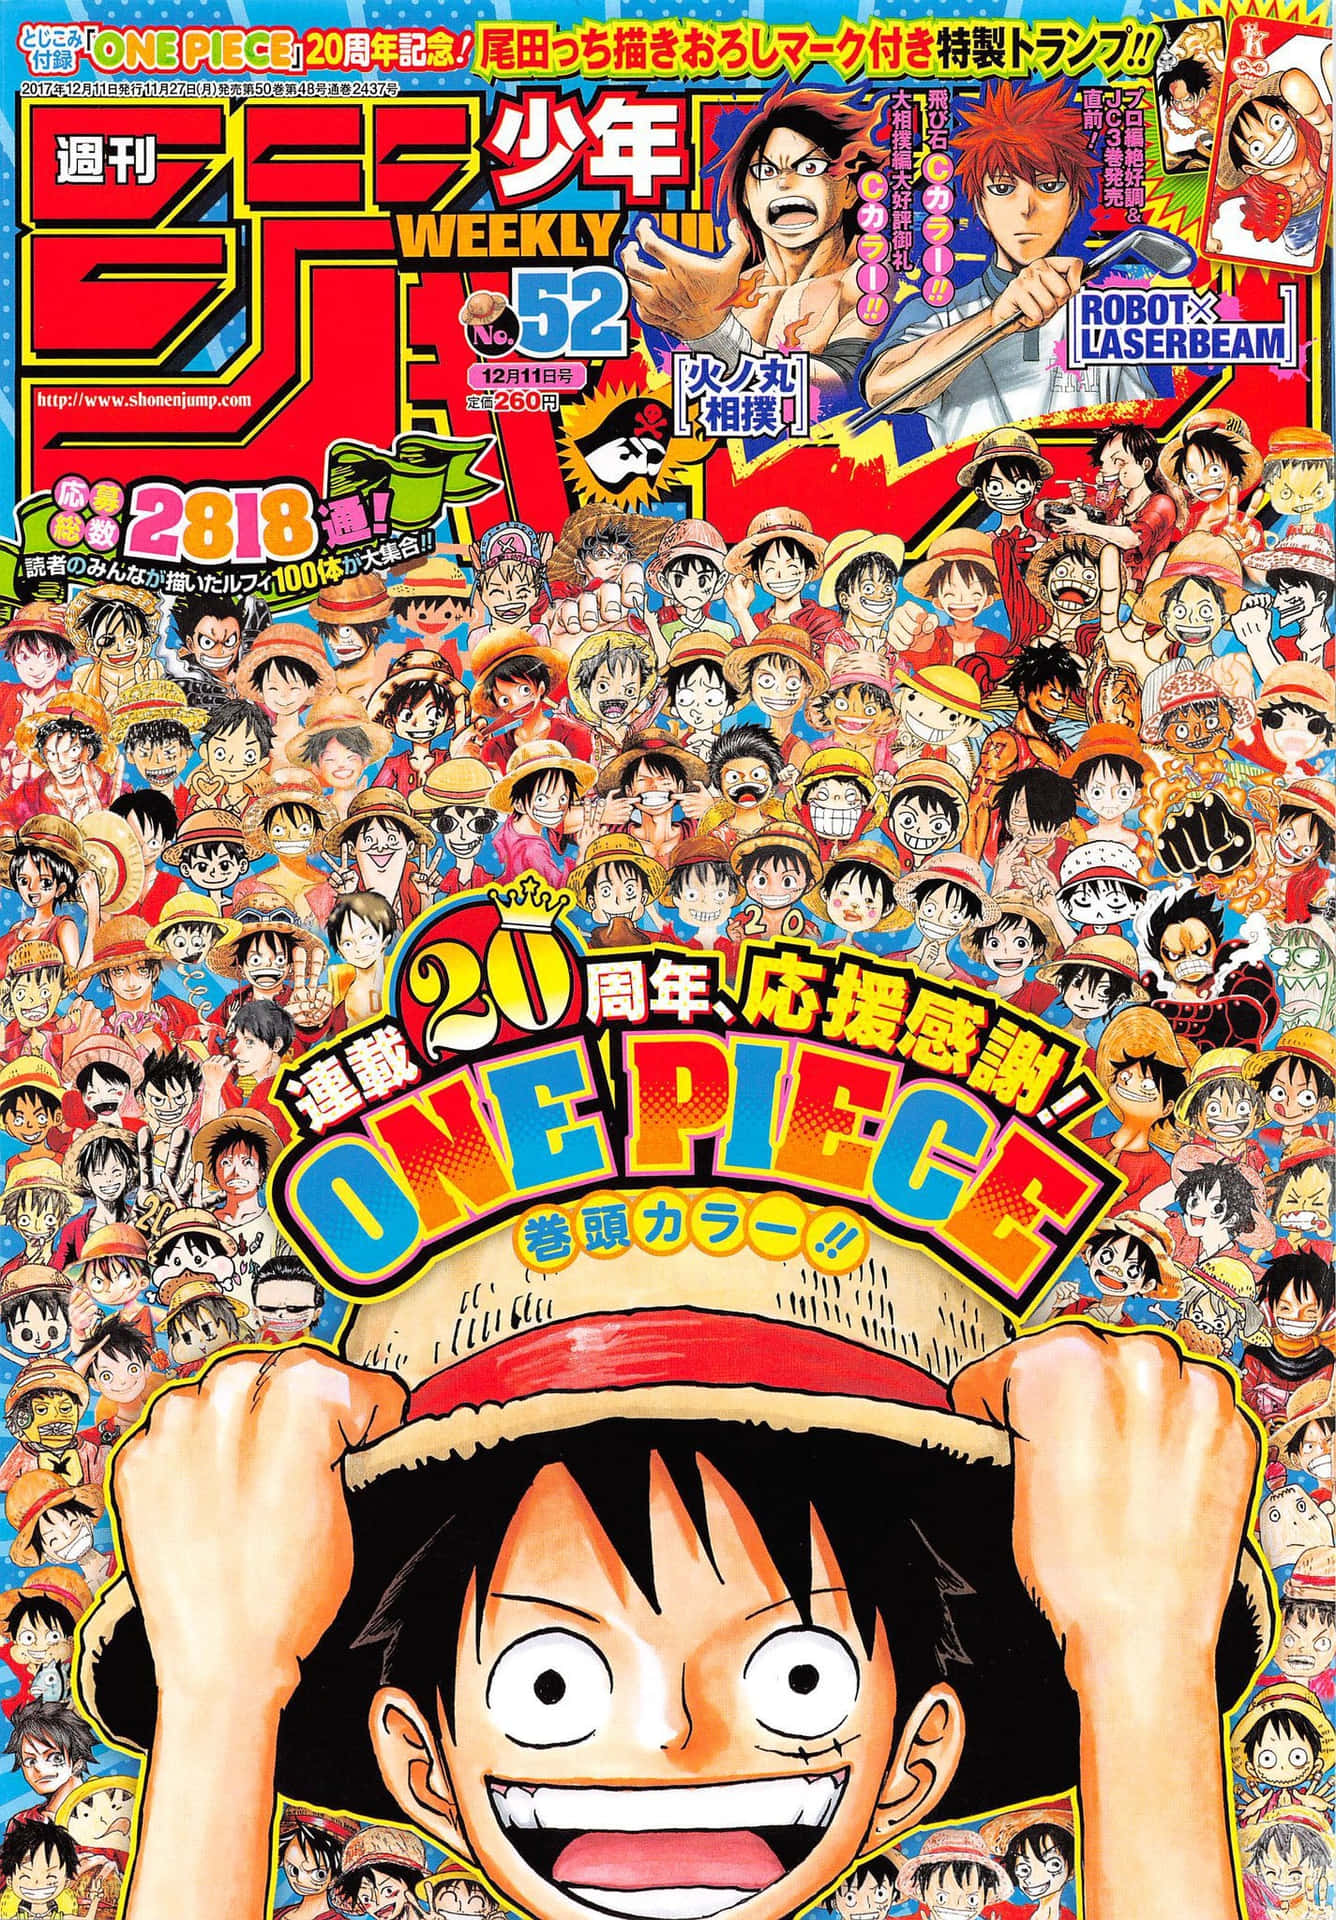 Tune in every week for the latest Shonen Jump manga and anime release! Wallpaper